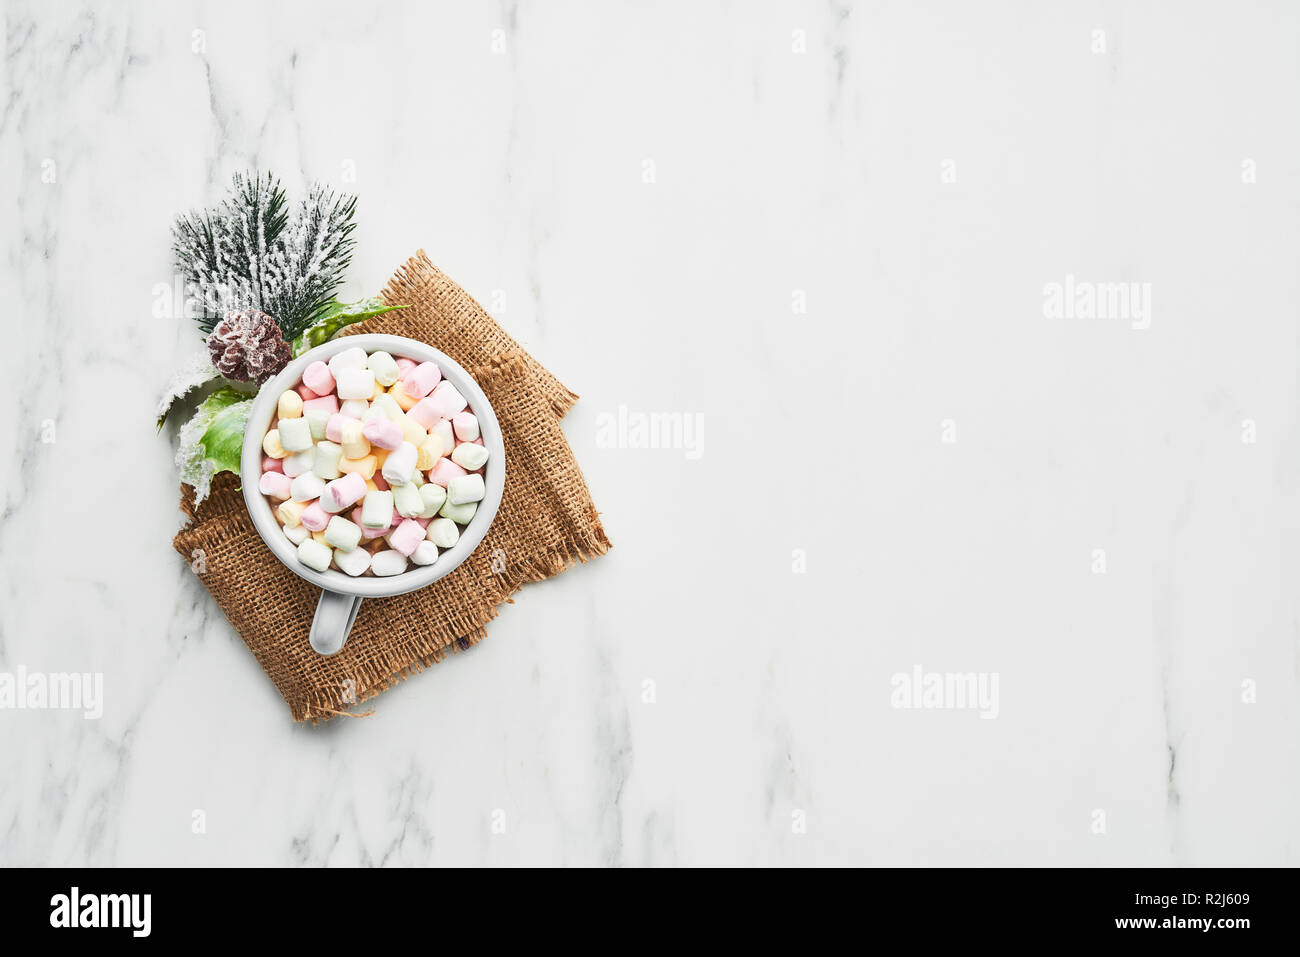 Cup of traditional Christmas hot chocolate or cocoa with marshmallow. Top view, white marble table, copy space. Stock Photo